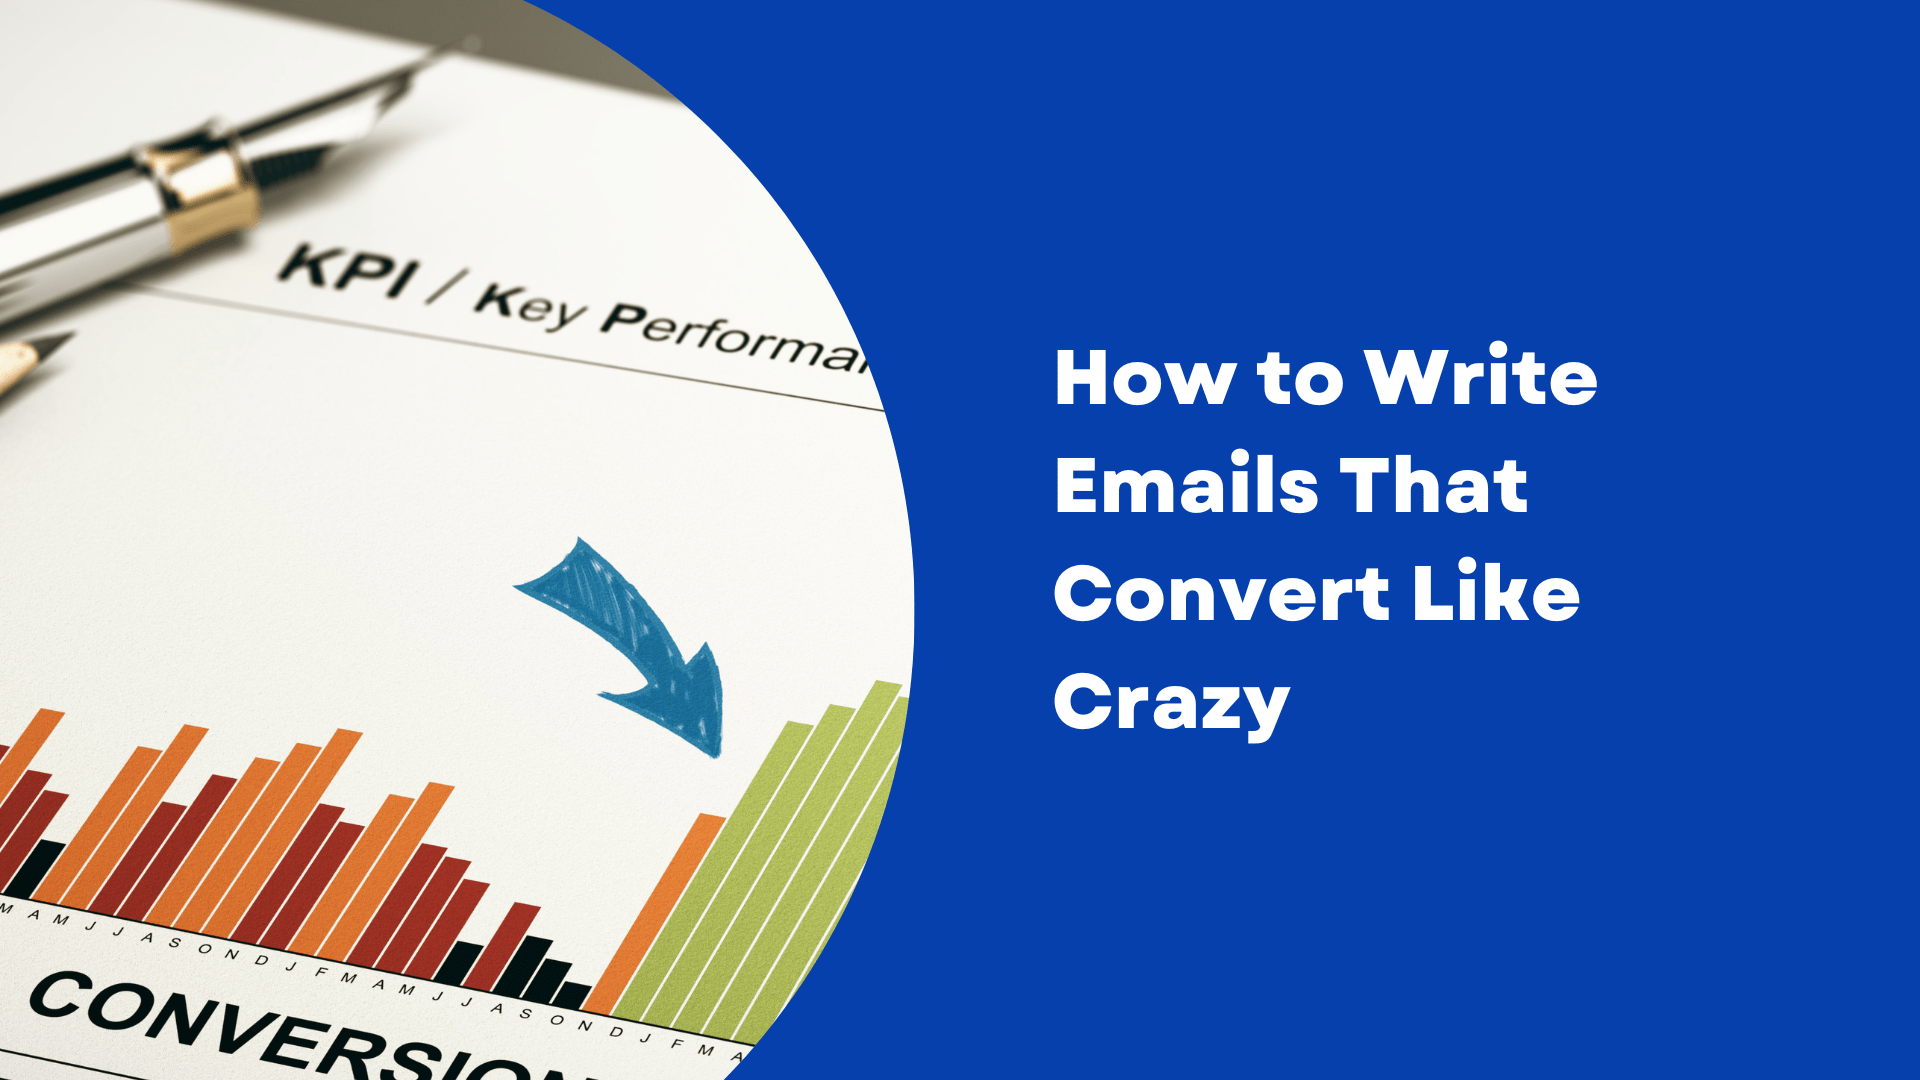 How to Write Emails That Convert Like Crazy